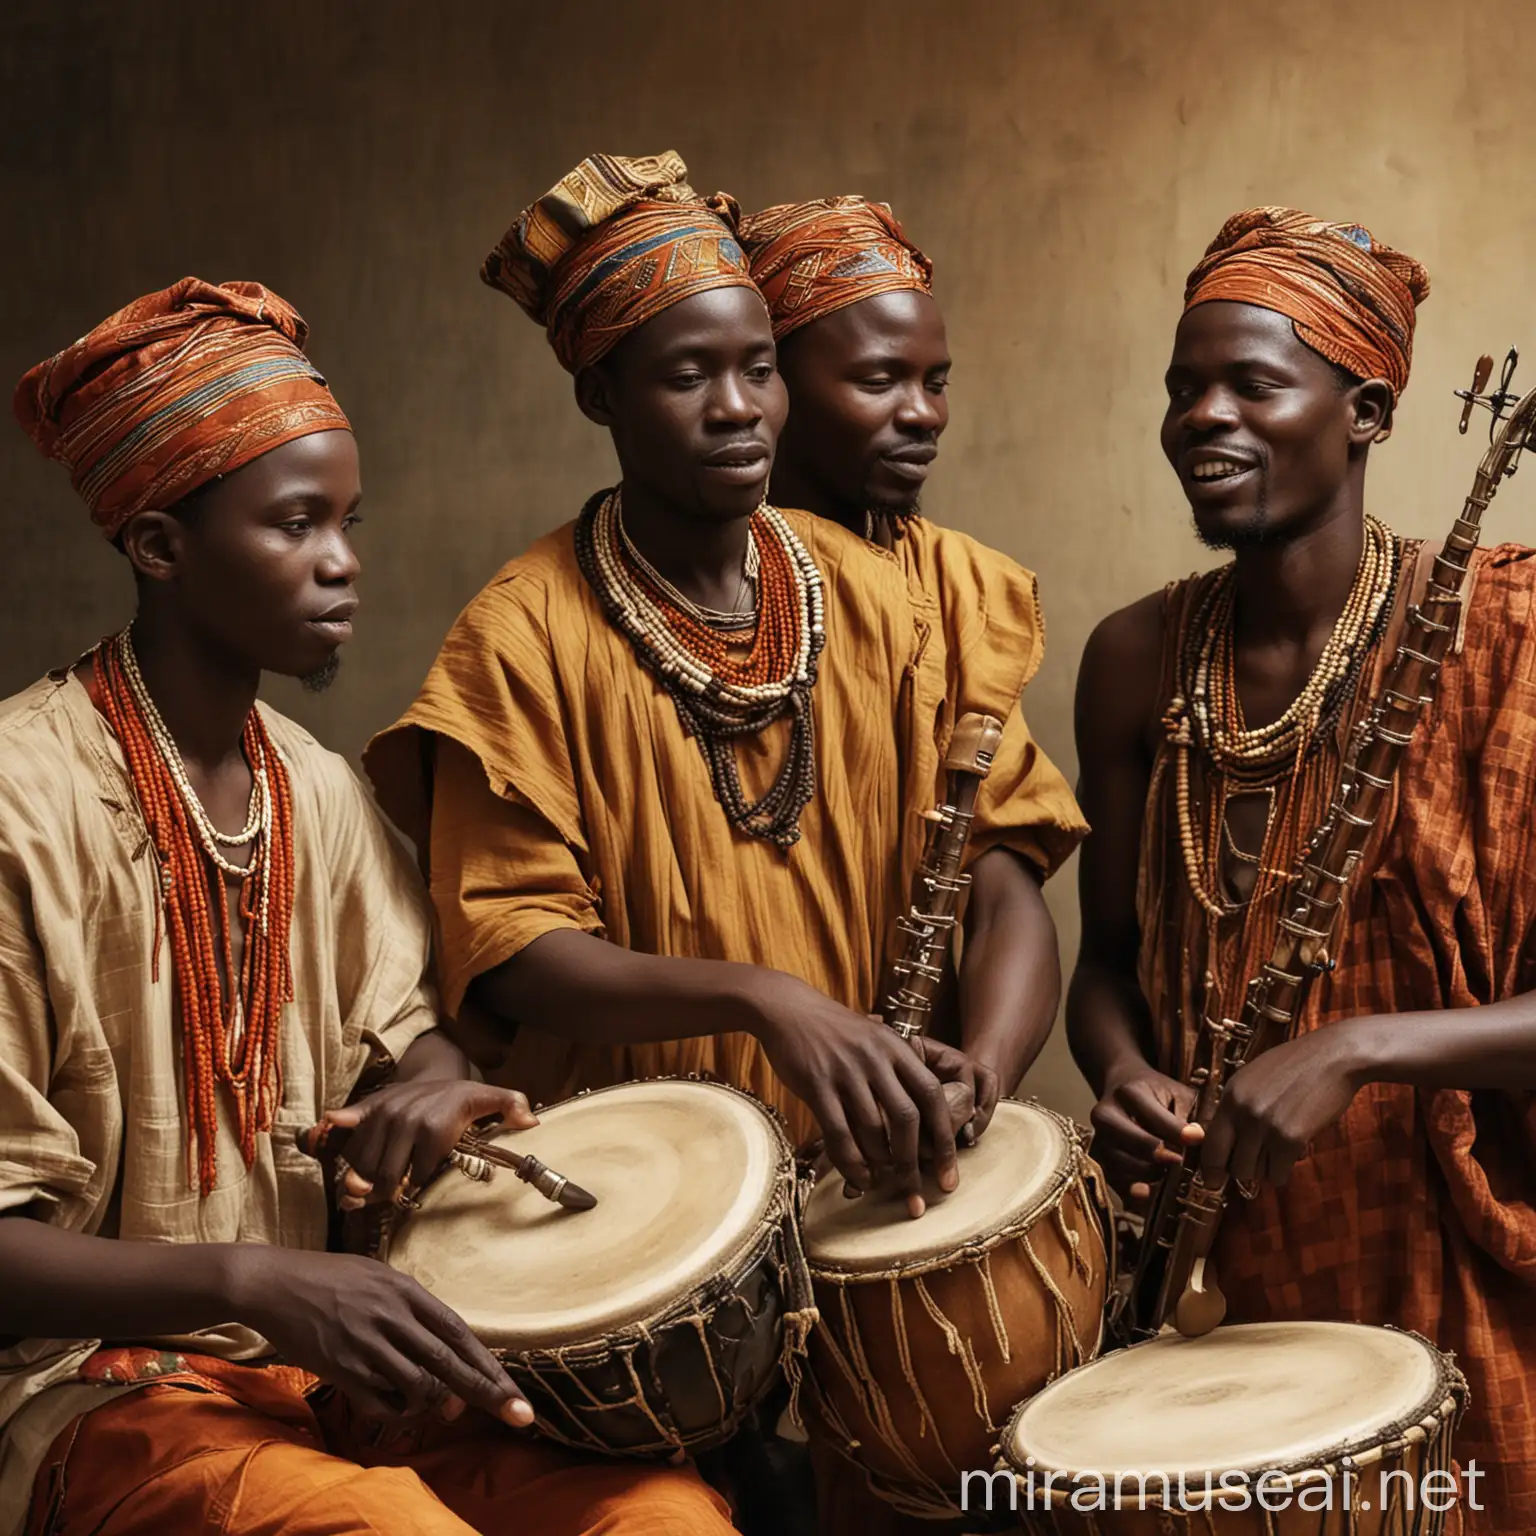 Vibrant Performance by Three Talented African Musicians